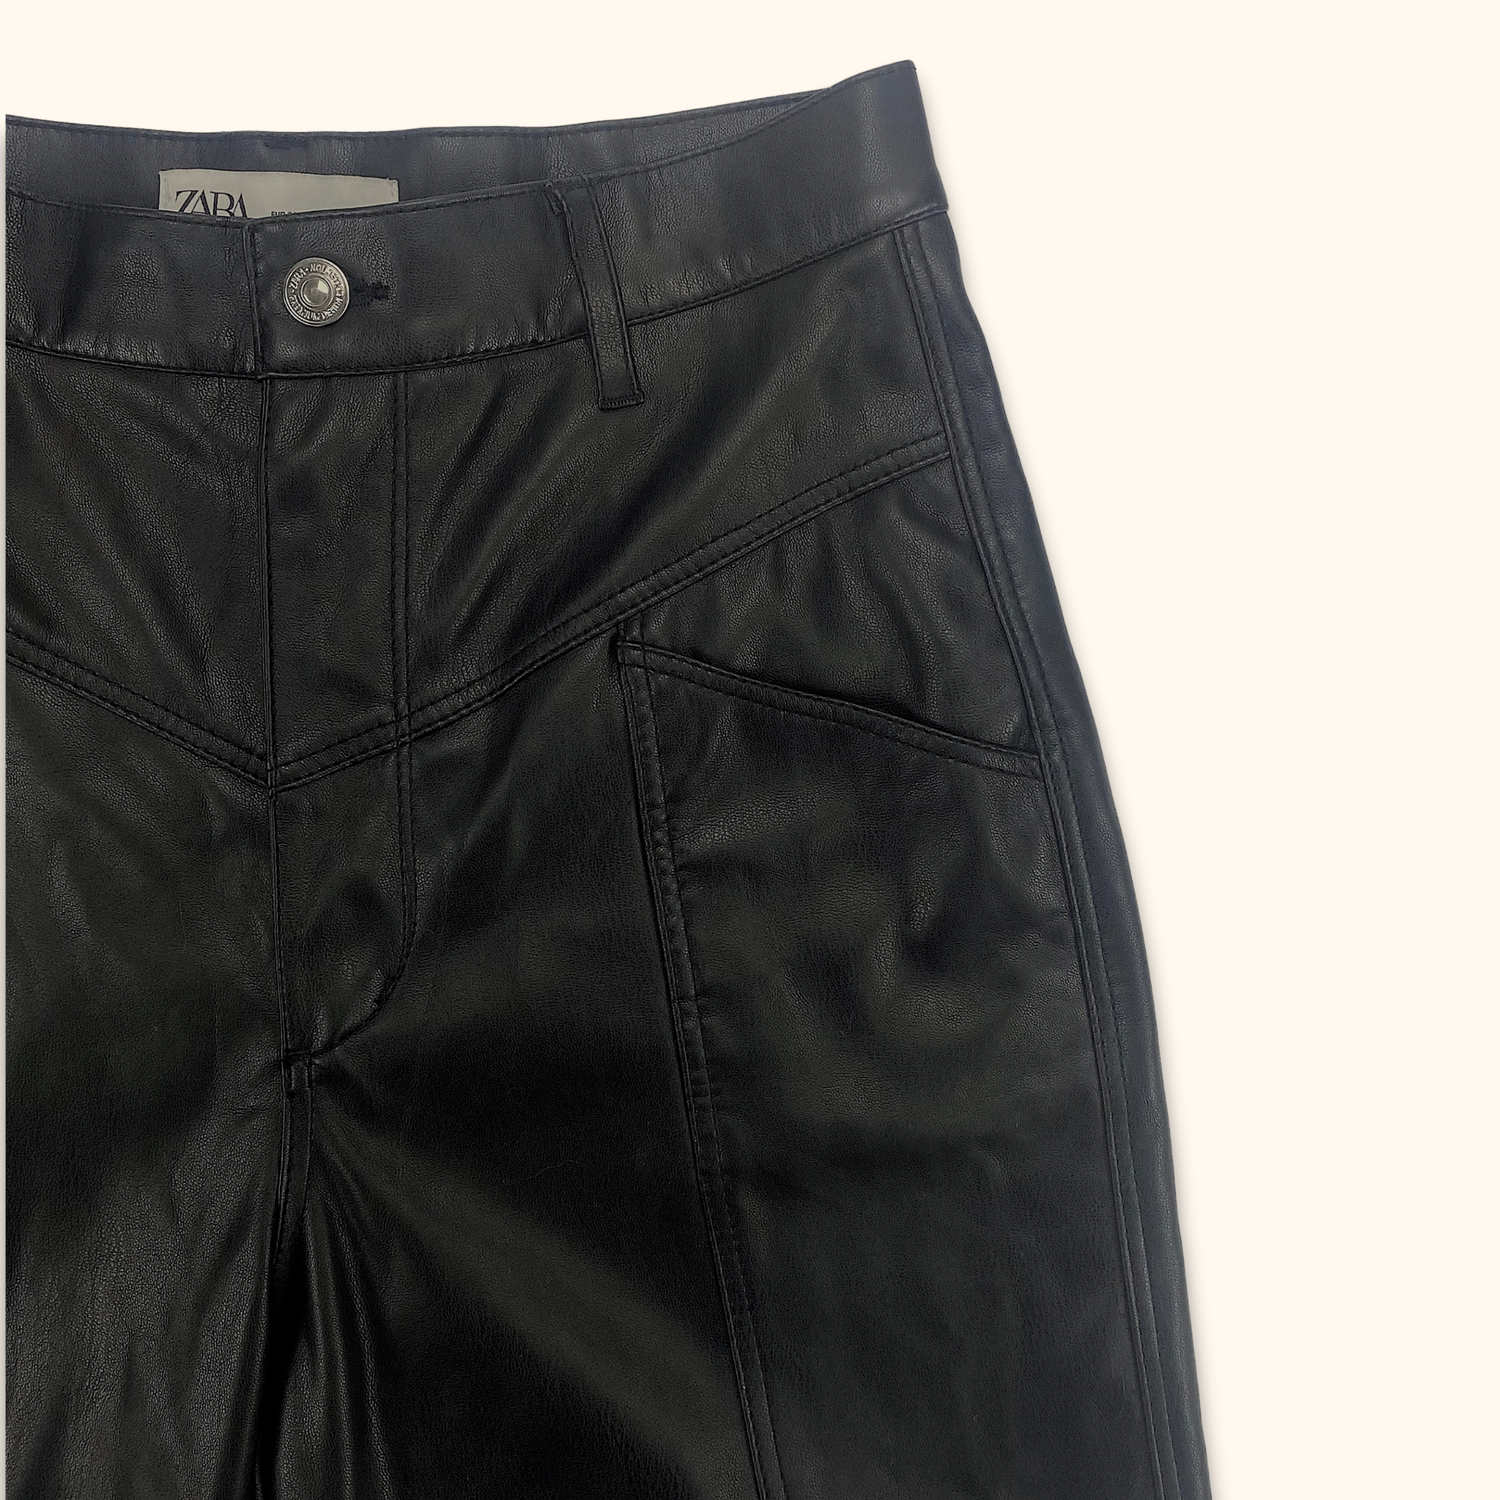 Zara High Rise Faux Leather Cropped Trousers Black - Size Small - Zara - Trousers